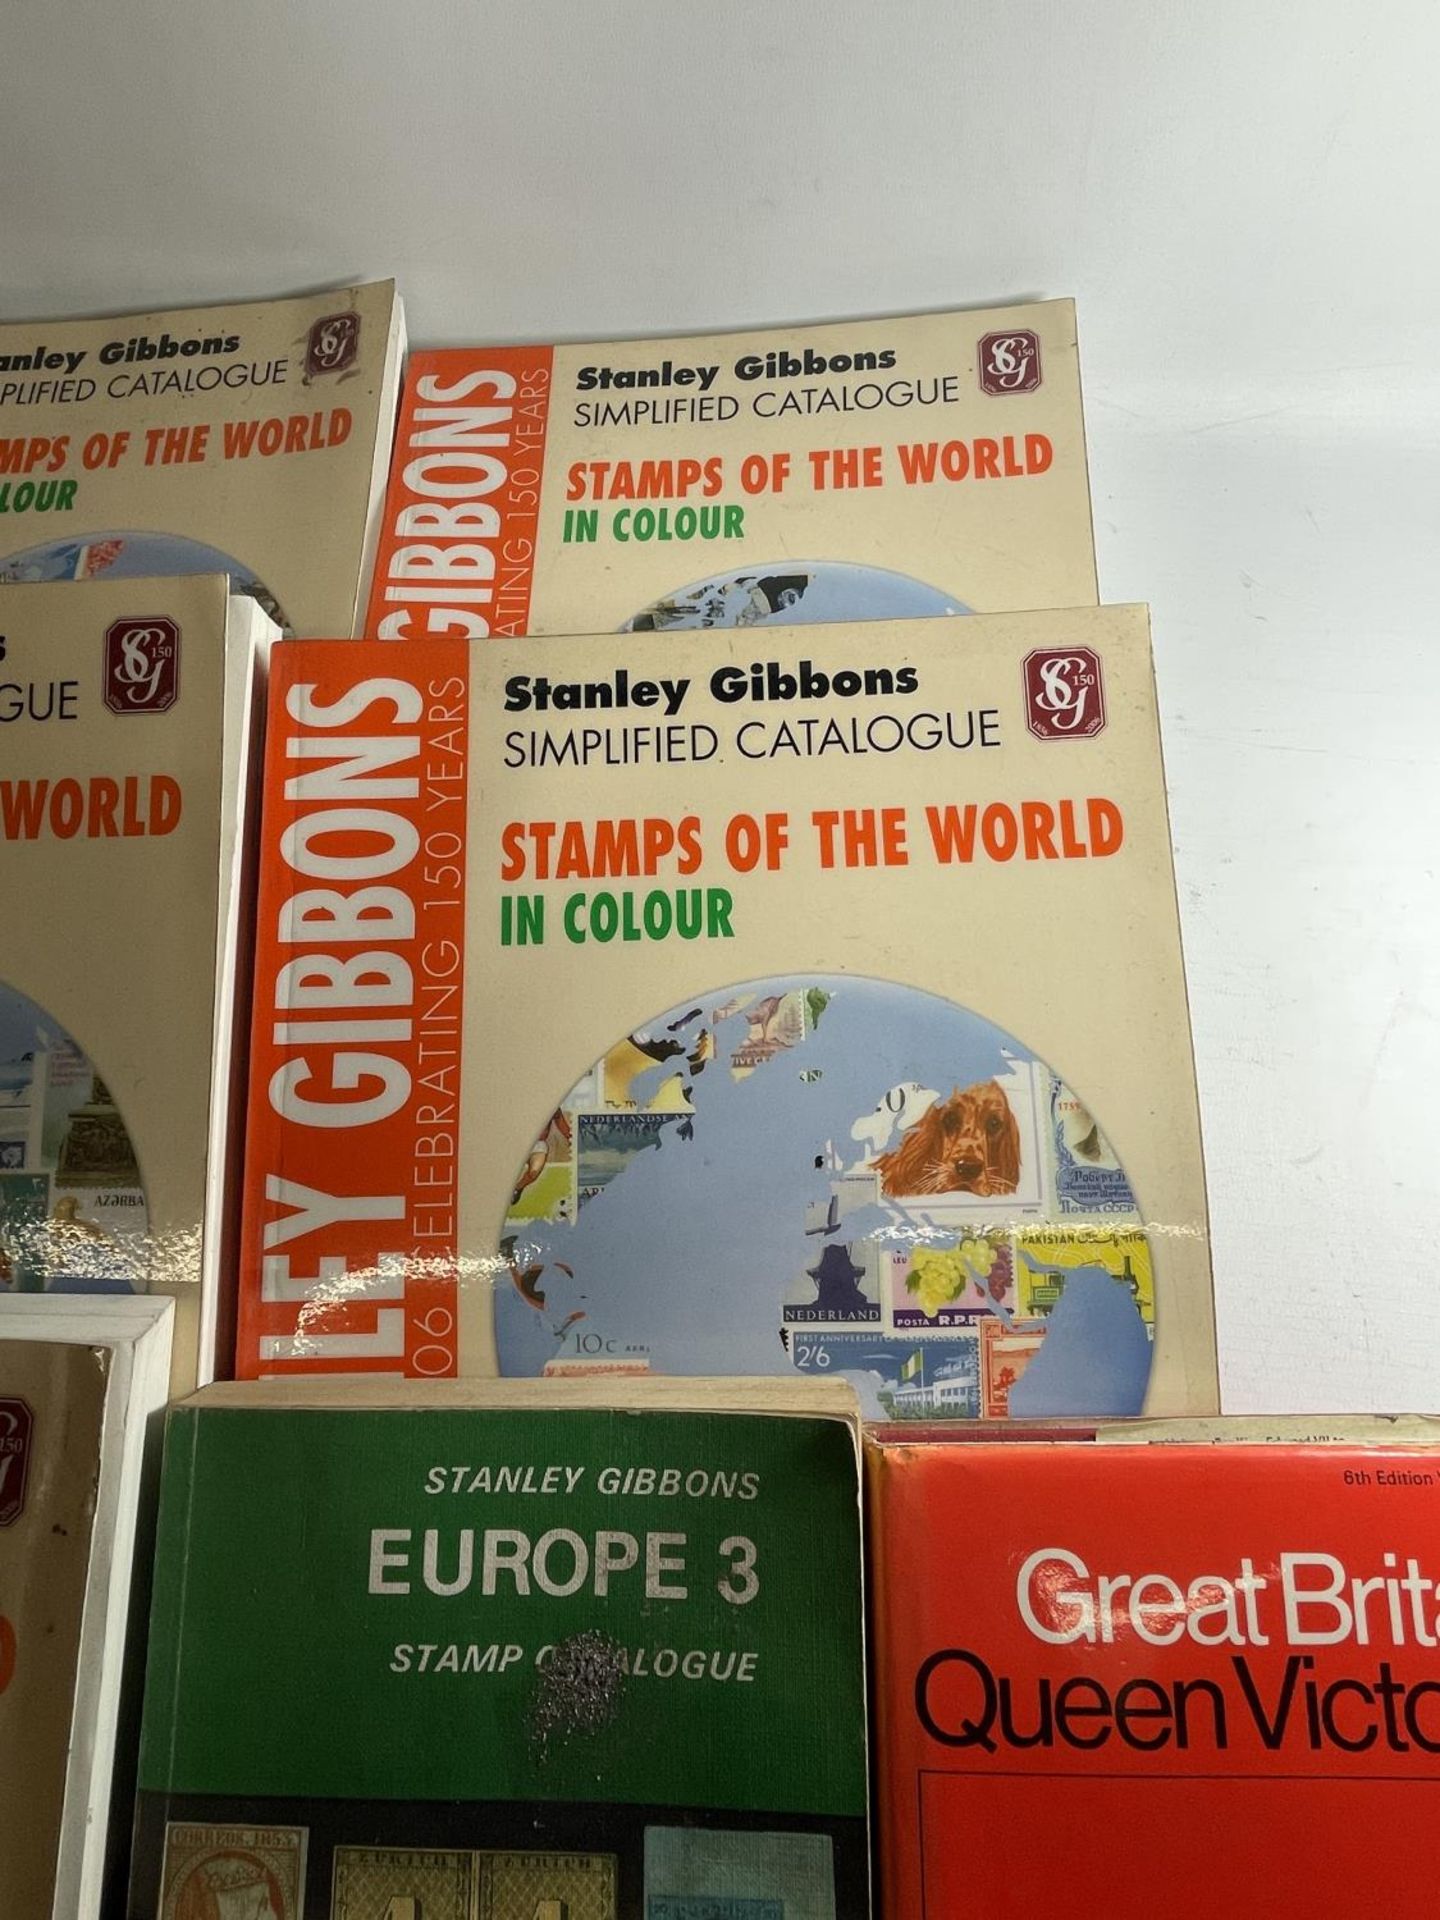 VOLUMES 1 - 5 OF THE 2006 EDITION OF STANLEY GIBBONS STAMP DIRECTORIES PLUS FOUR OTHER STAMP BOOKS - Bild 4 aus 5